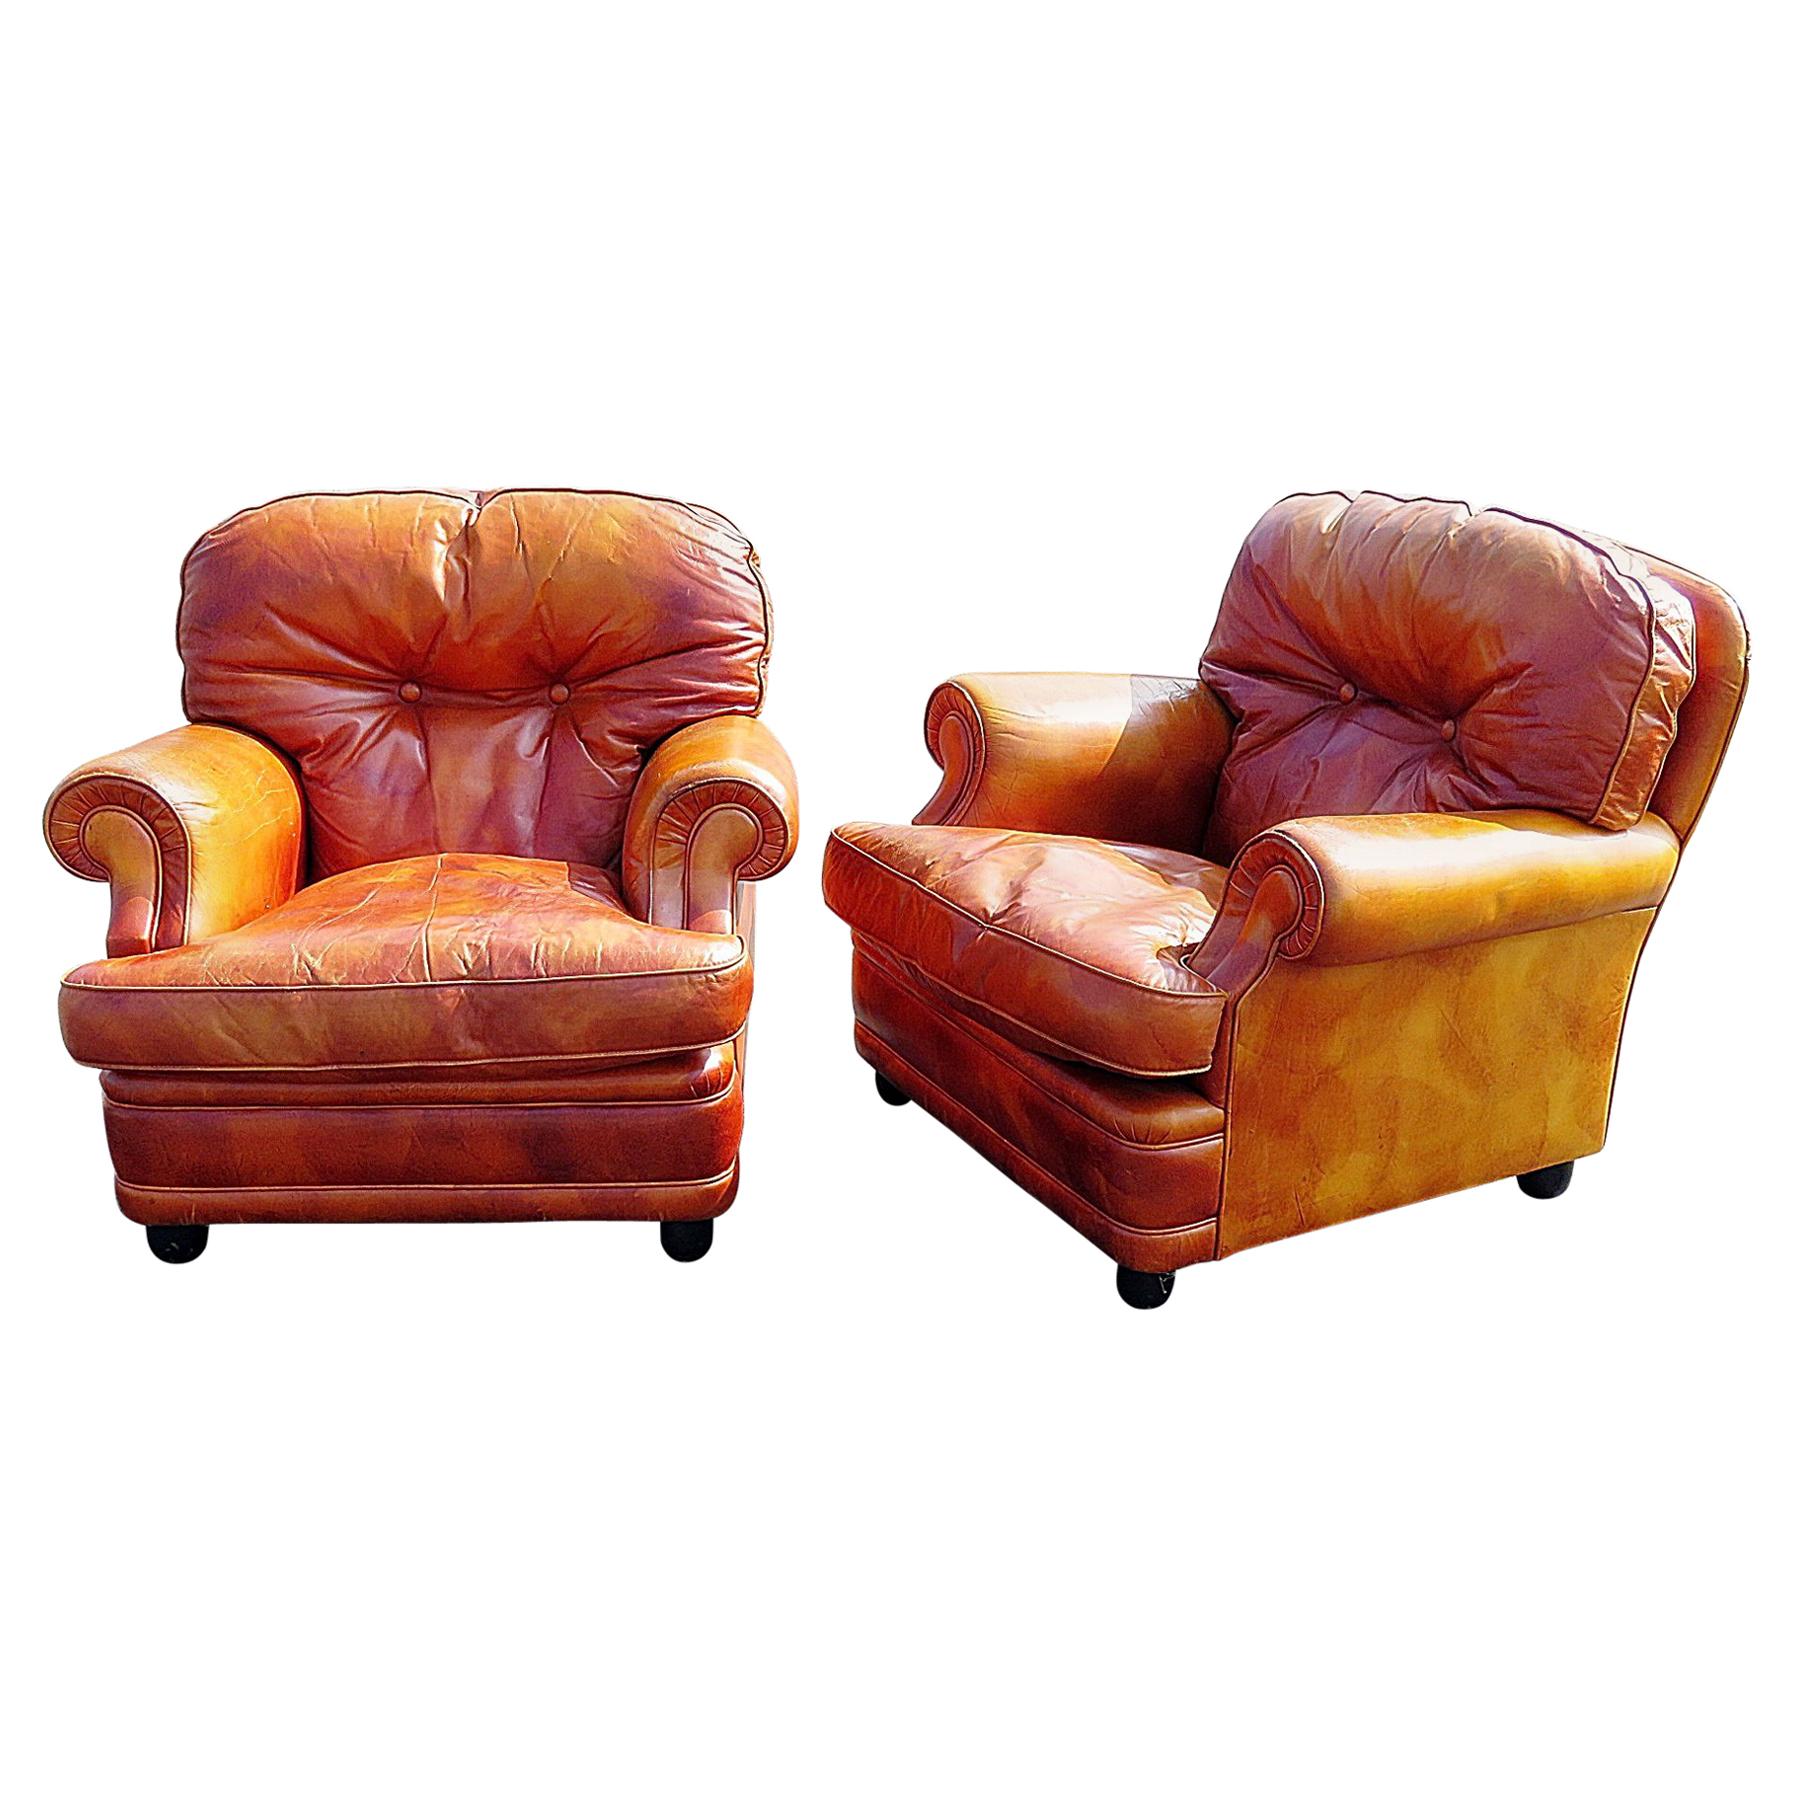 Pair of Italian Leather Club Chairs